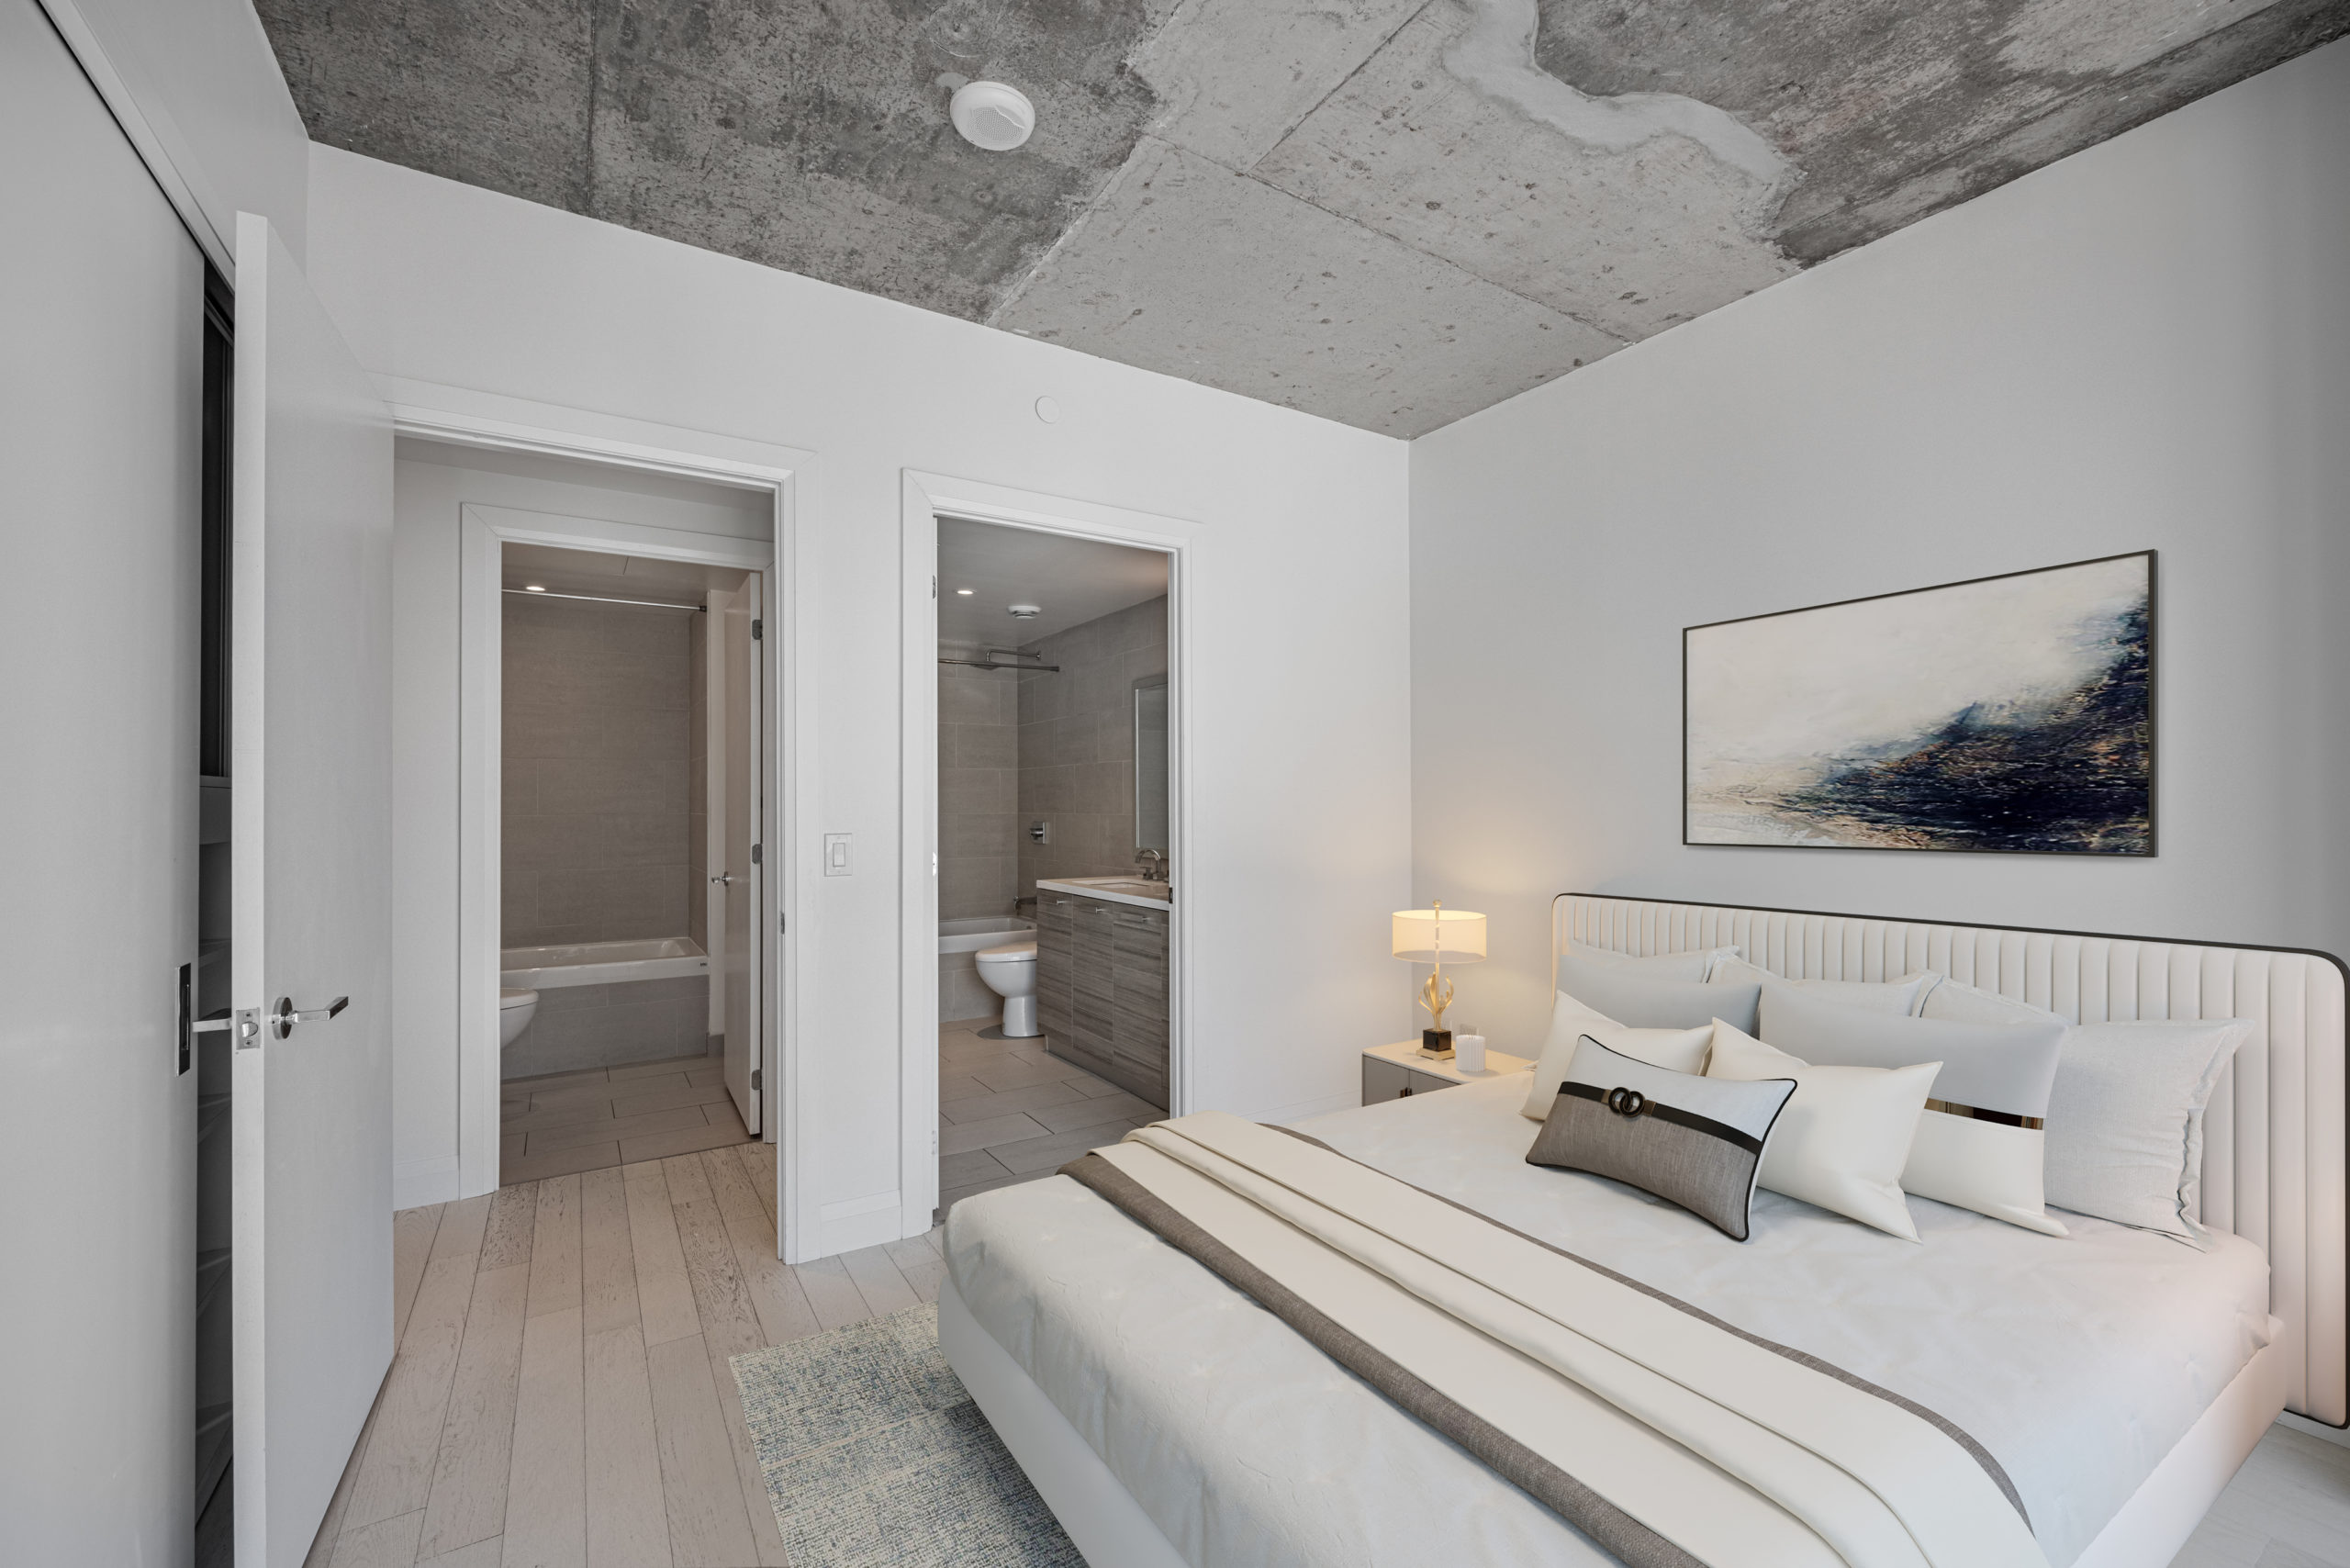 Condo bedroom with hardwood floors, gray walls and exposed concrete ceiling.